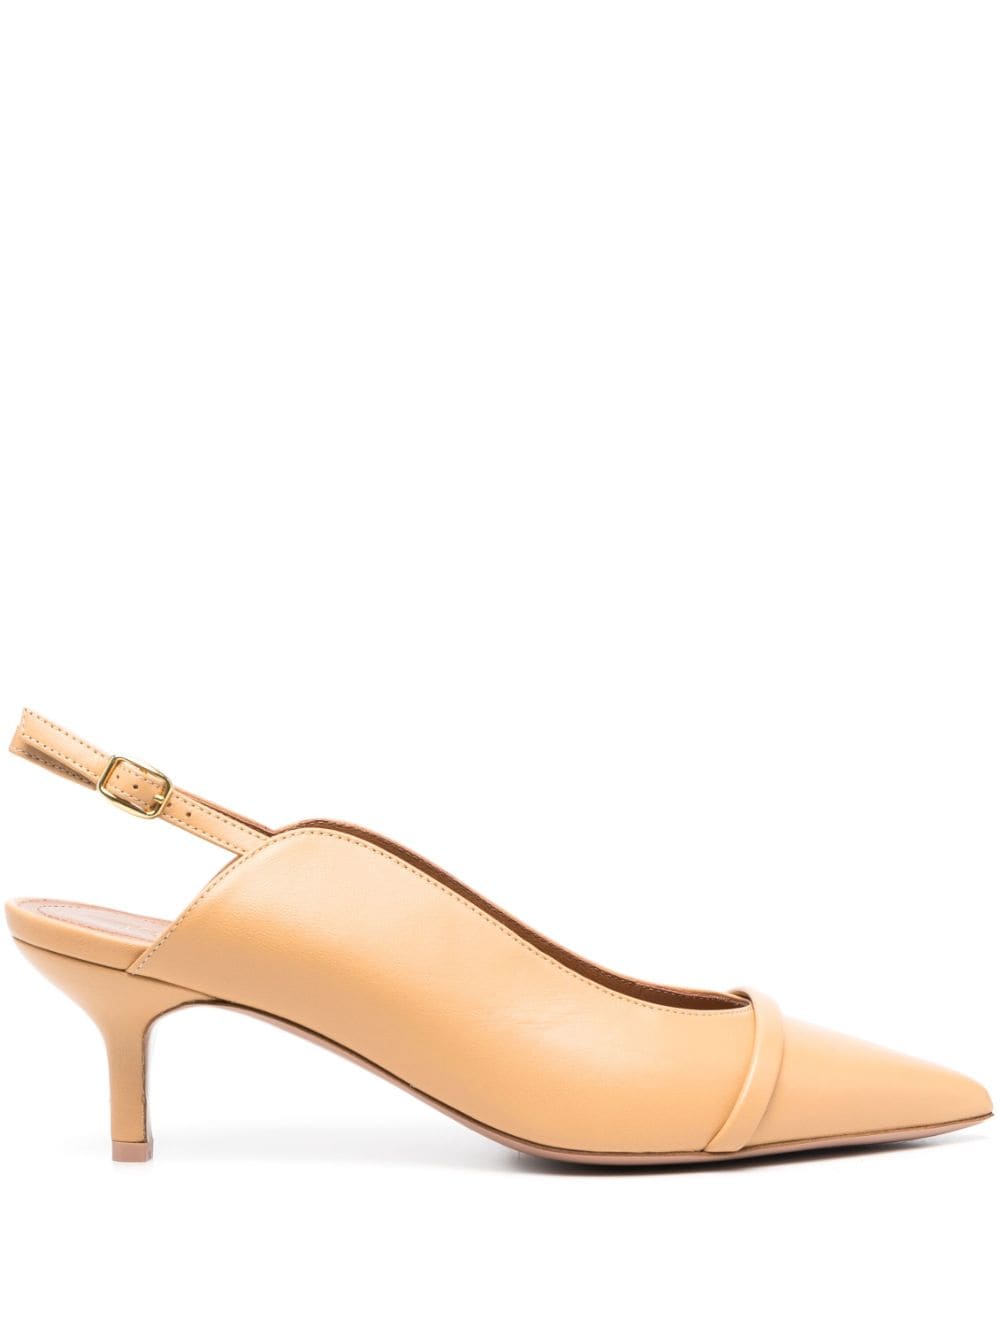 Malone Souliers Marion 45mm leather slingback pumps - Neutrals von Malone Souliers